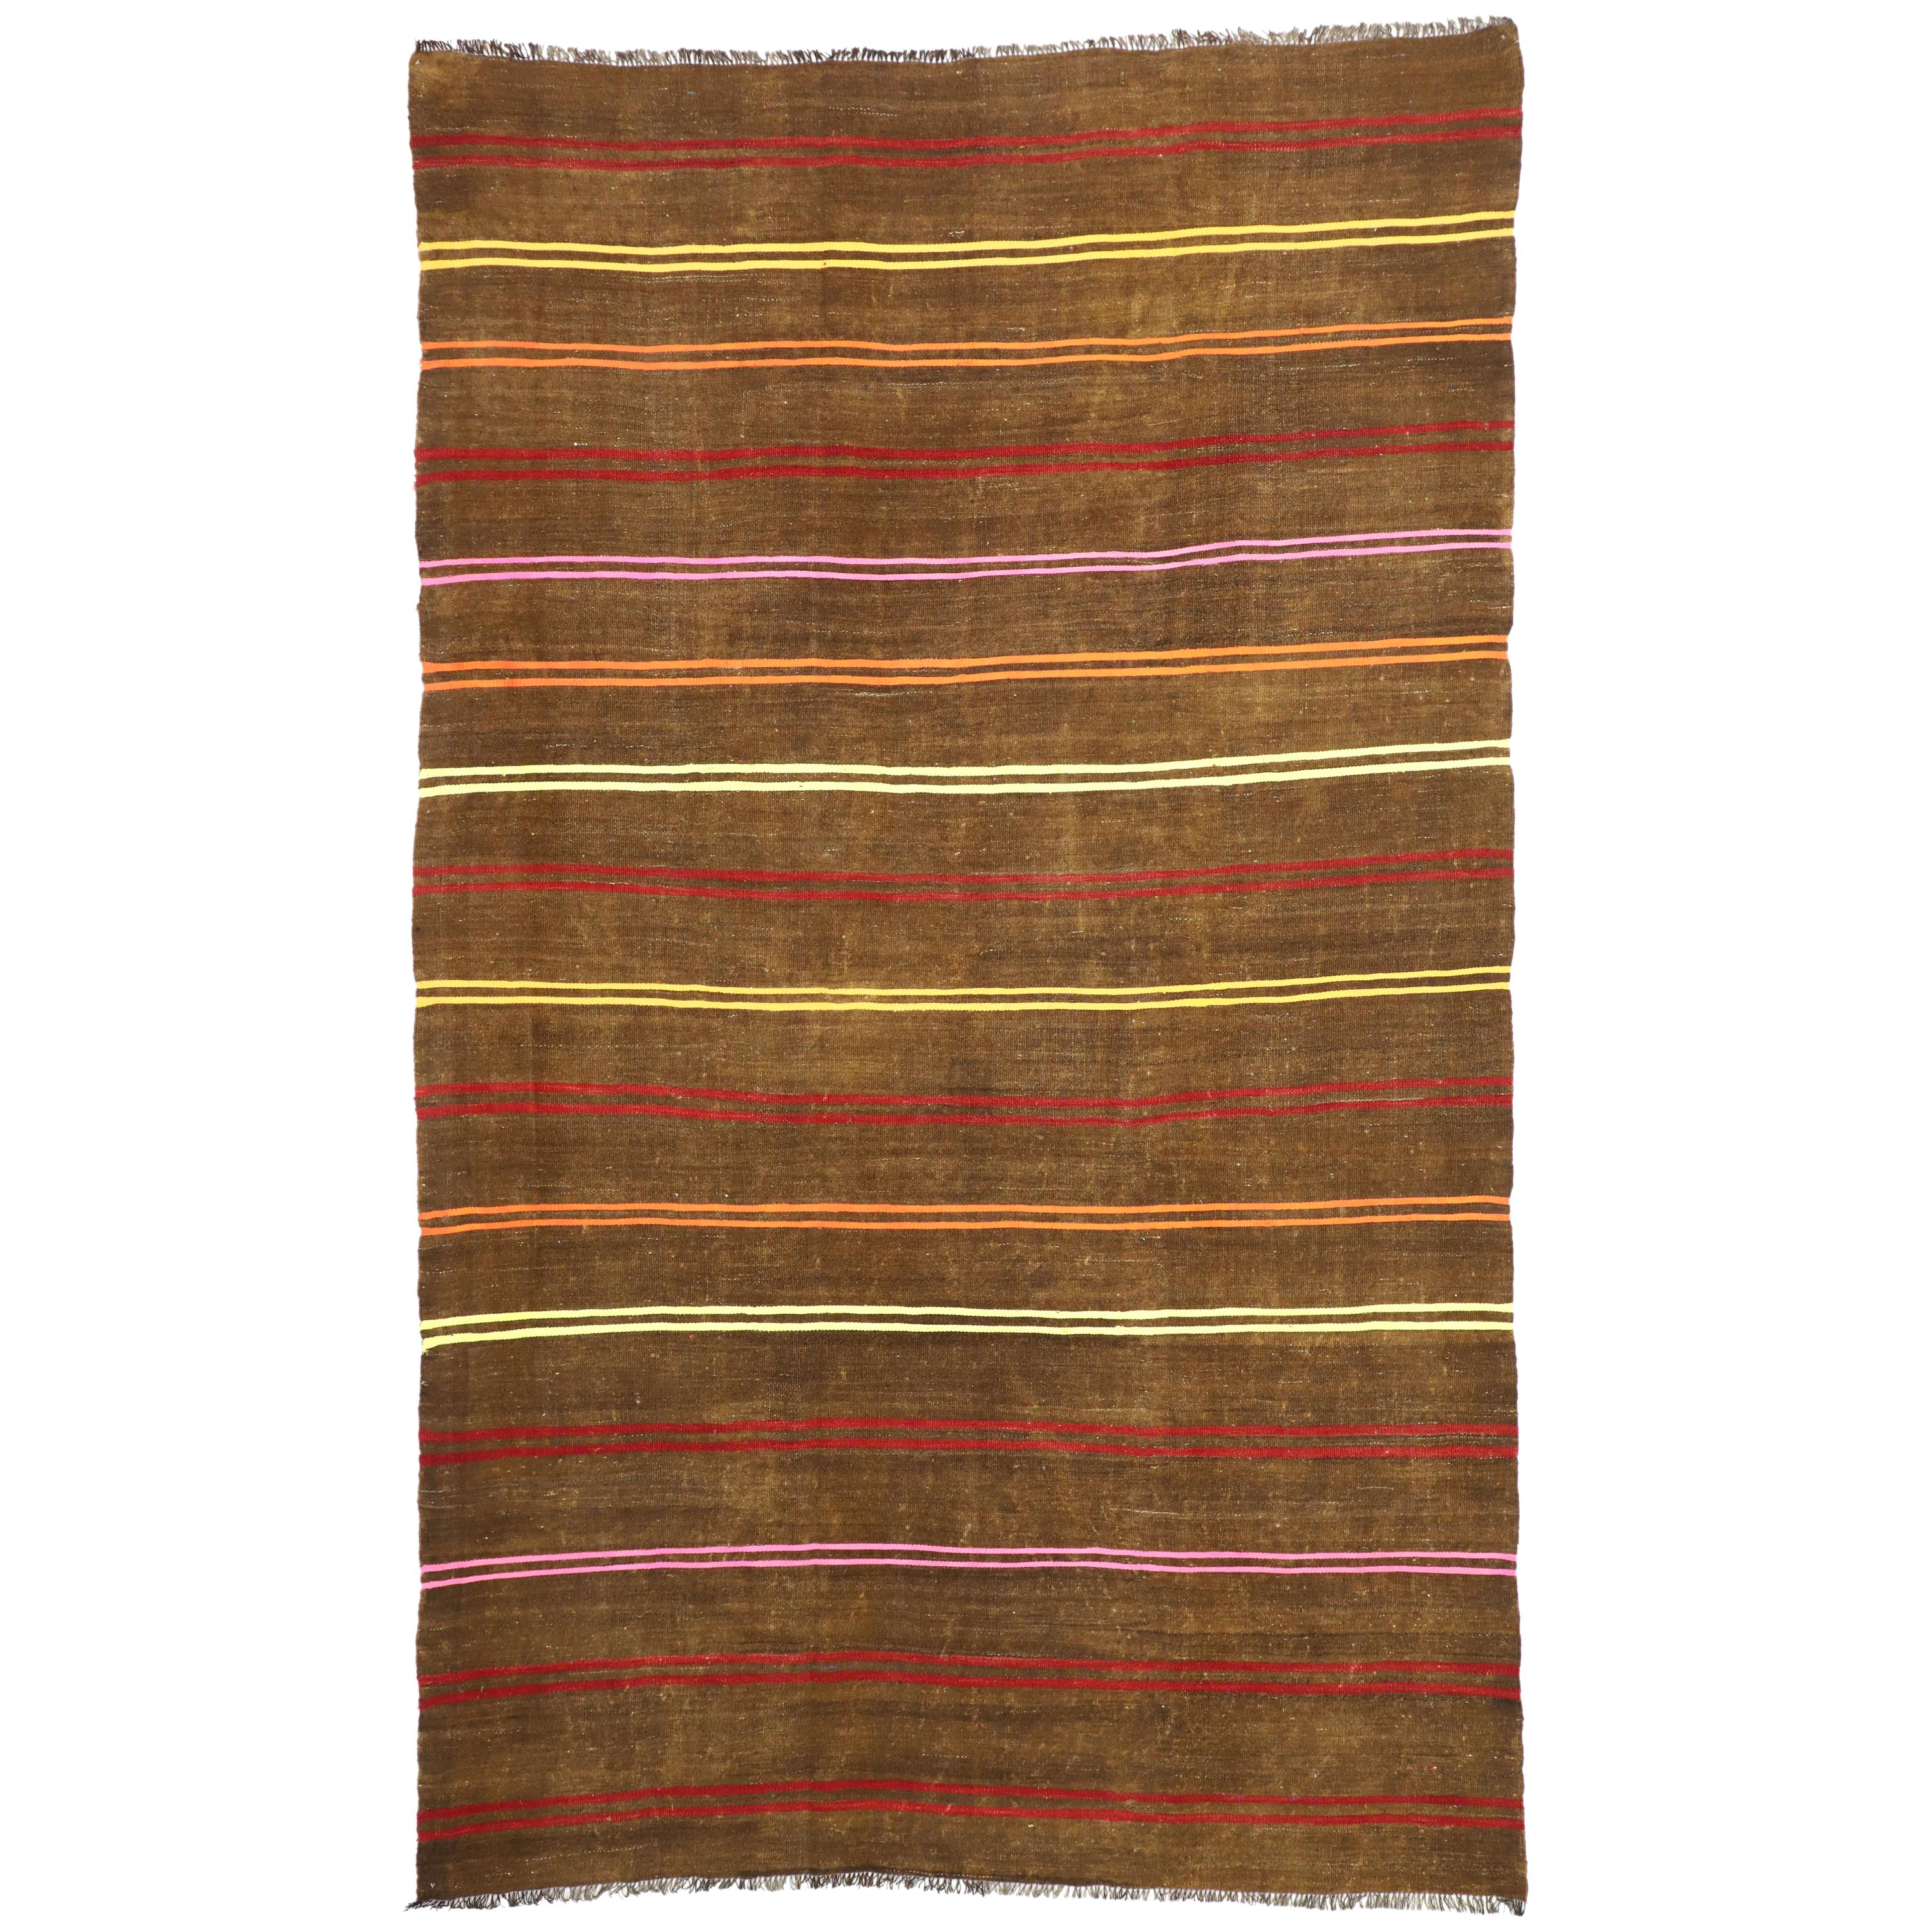 Vintage Turkish Striped Kilim Area Rug with Bohemian Tribal Style For Sale